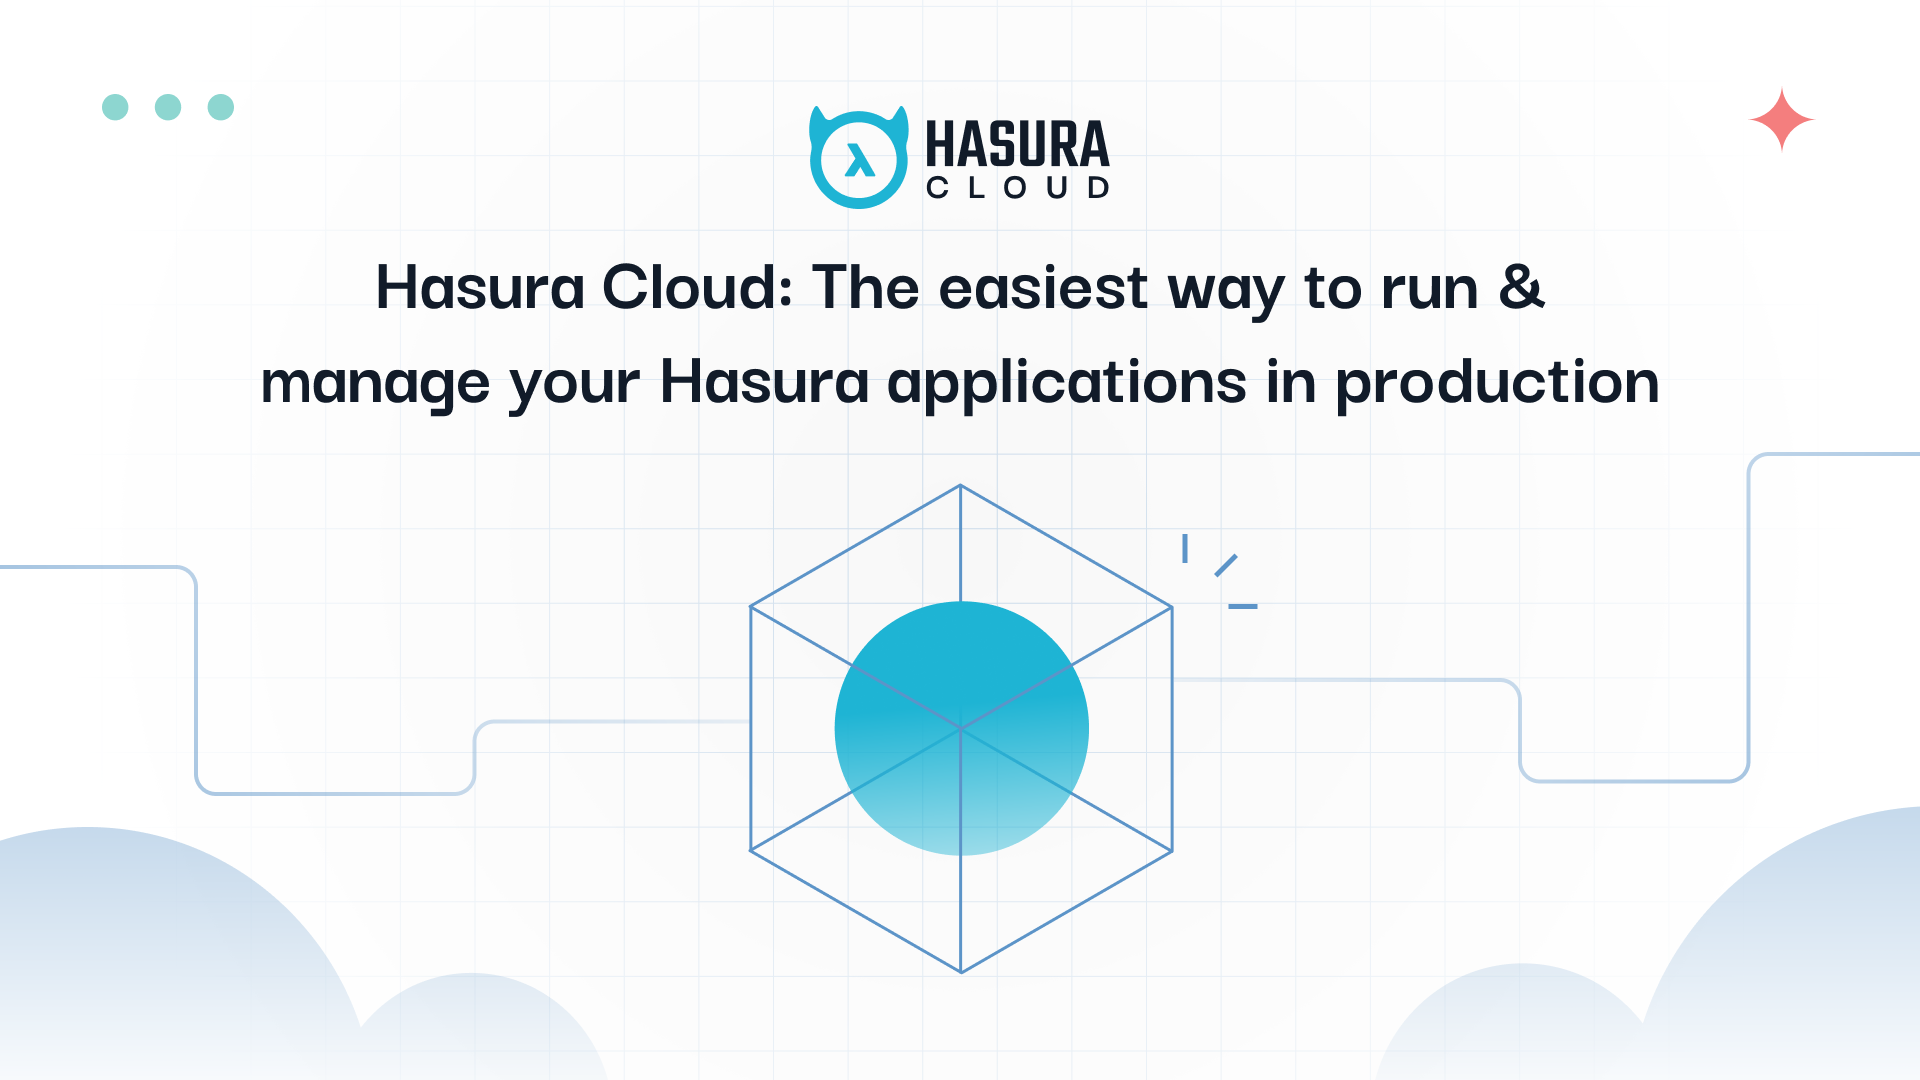 Hasura Cloud: the easiest way to run & manage your Hasura applications in production